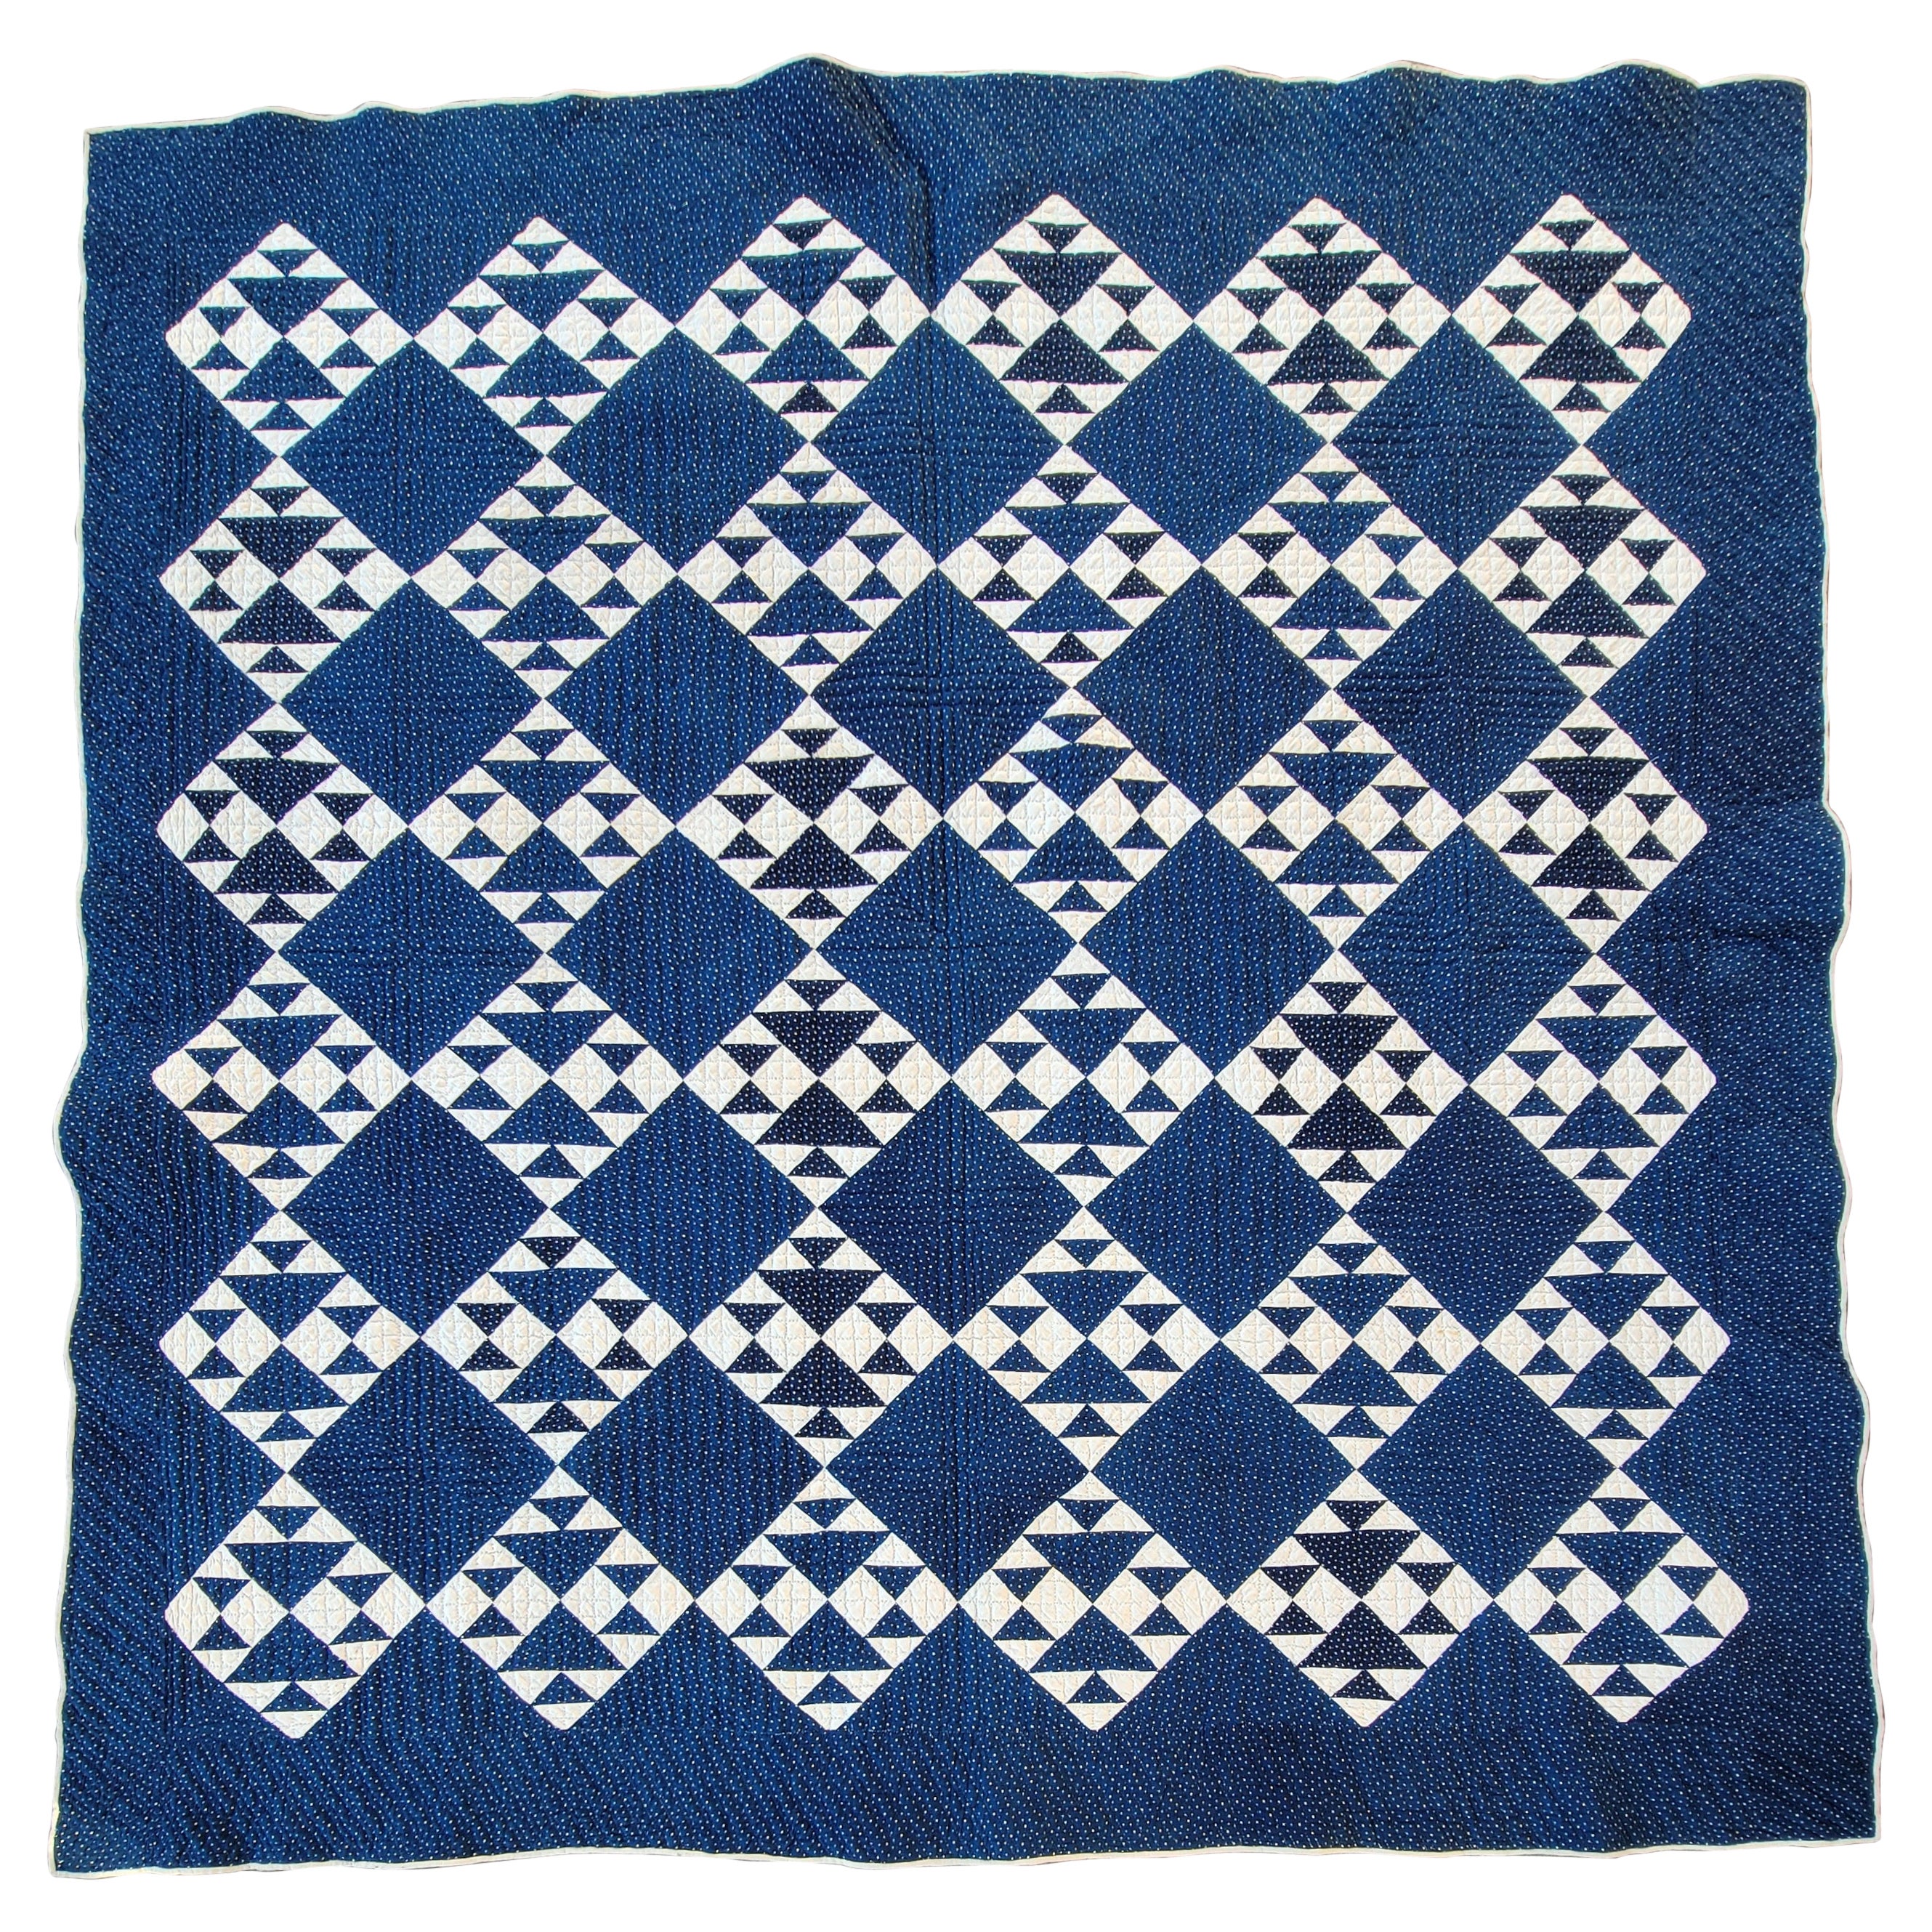 19th C Indigo & White Crown of Thorns Quilt For Sale